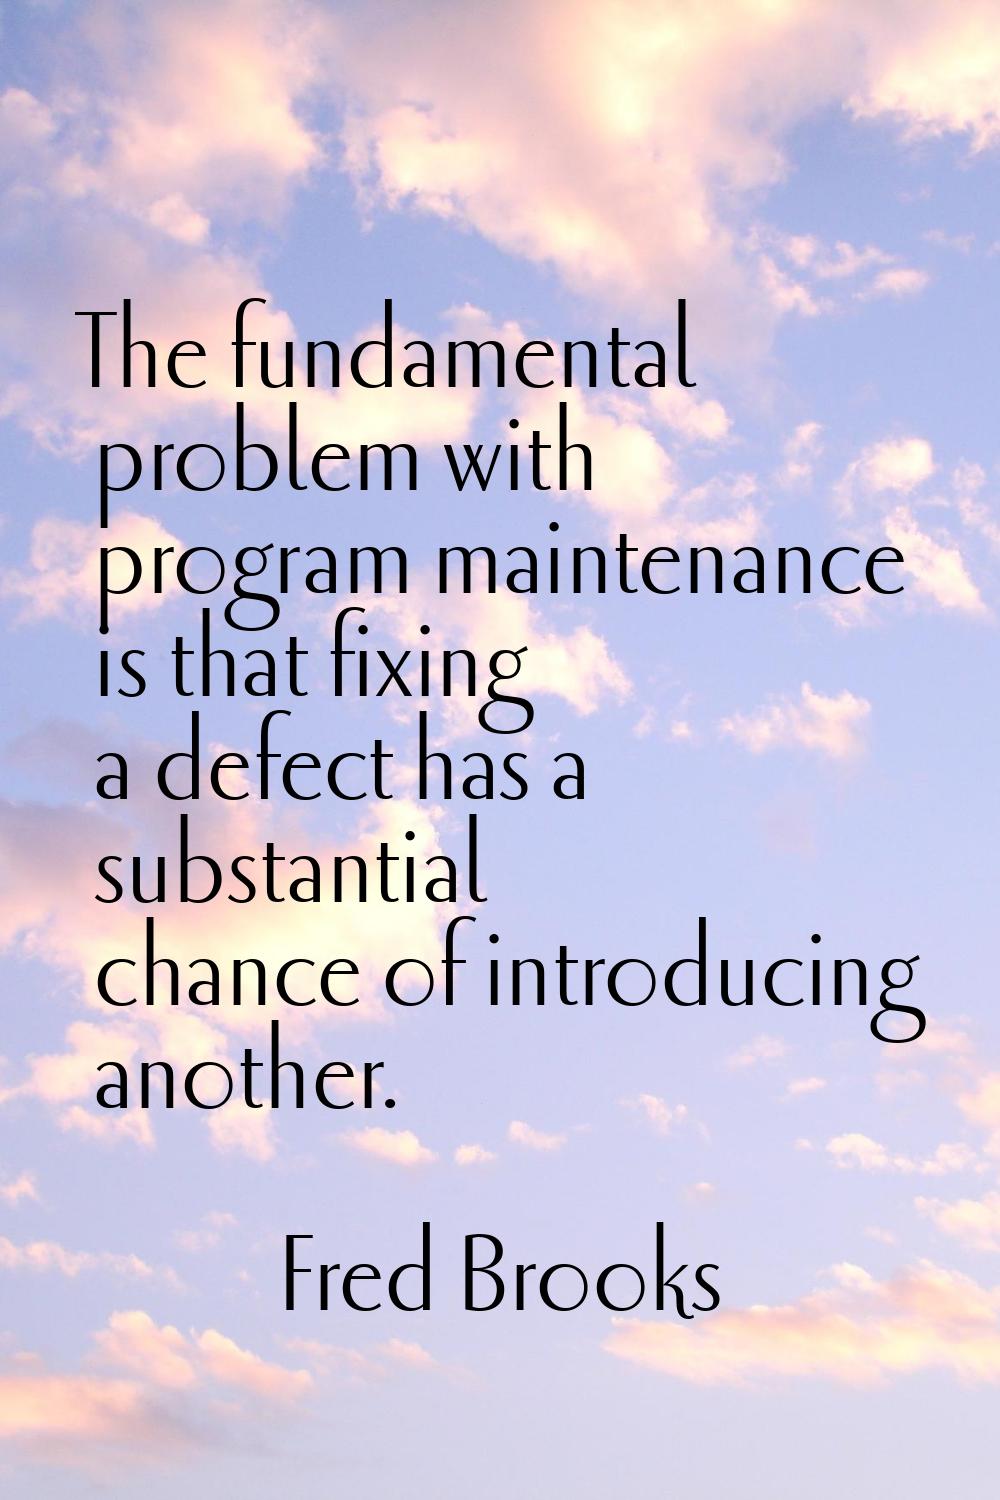 The fundamental problem with program maintenance is that fixing a defect has a substantial chance o